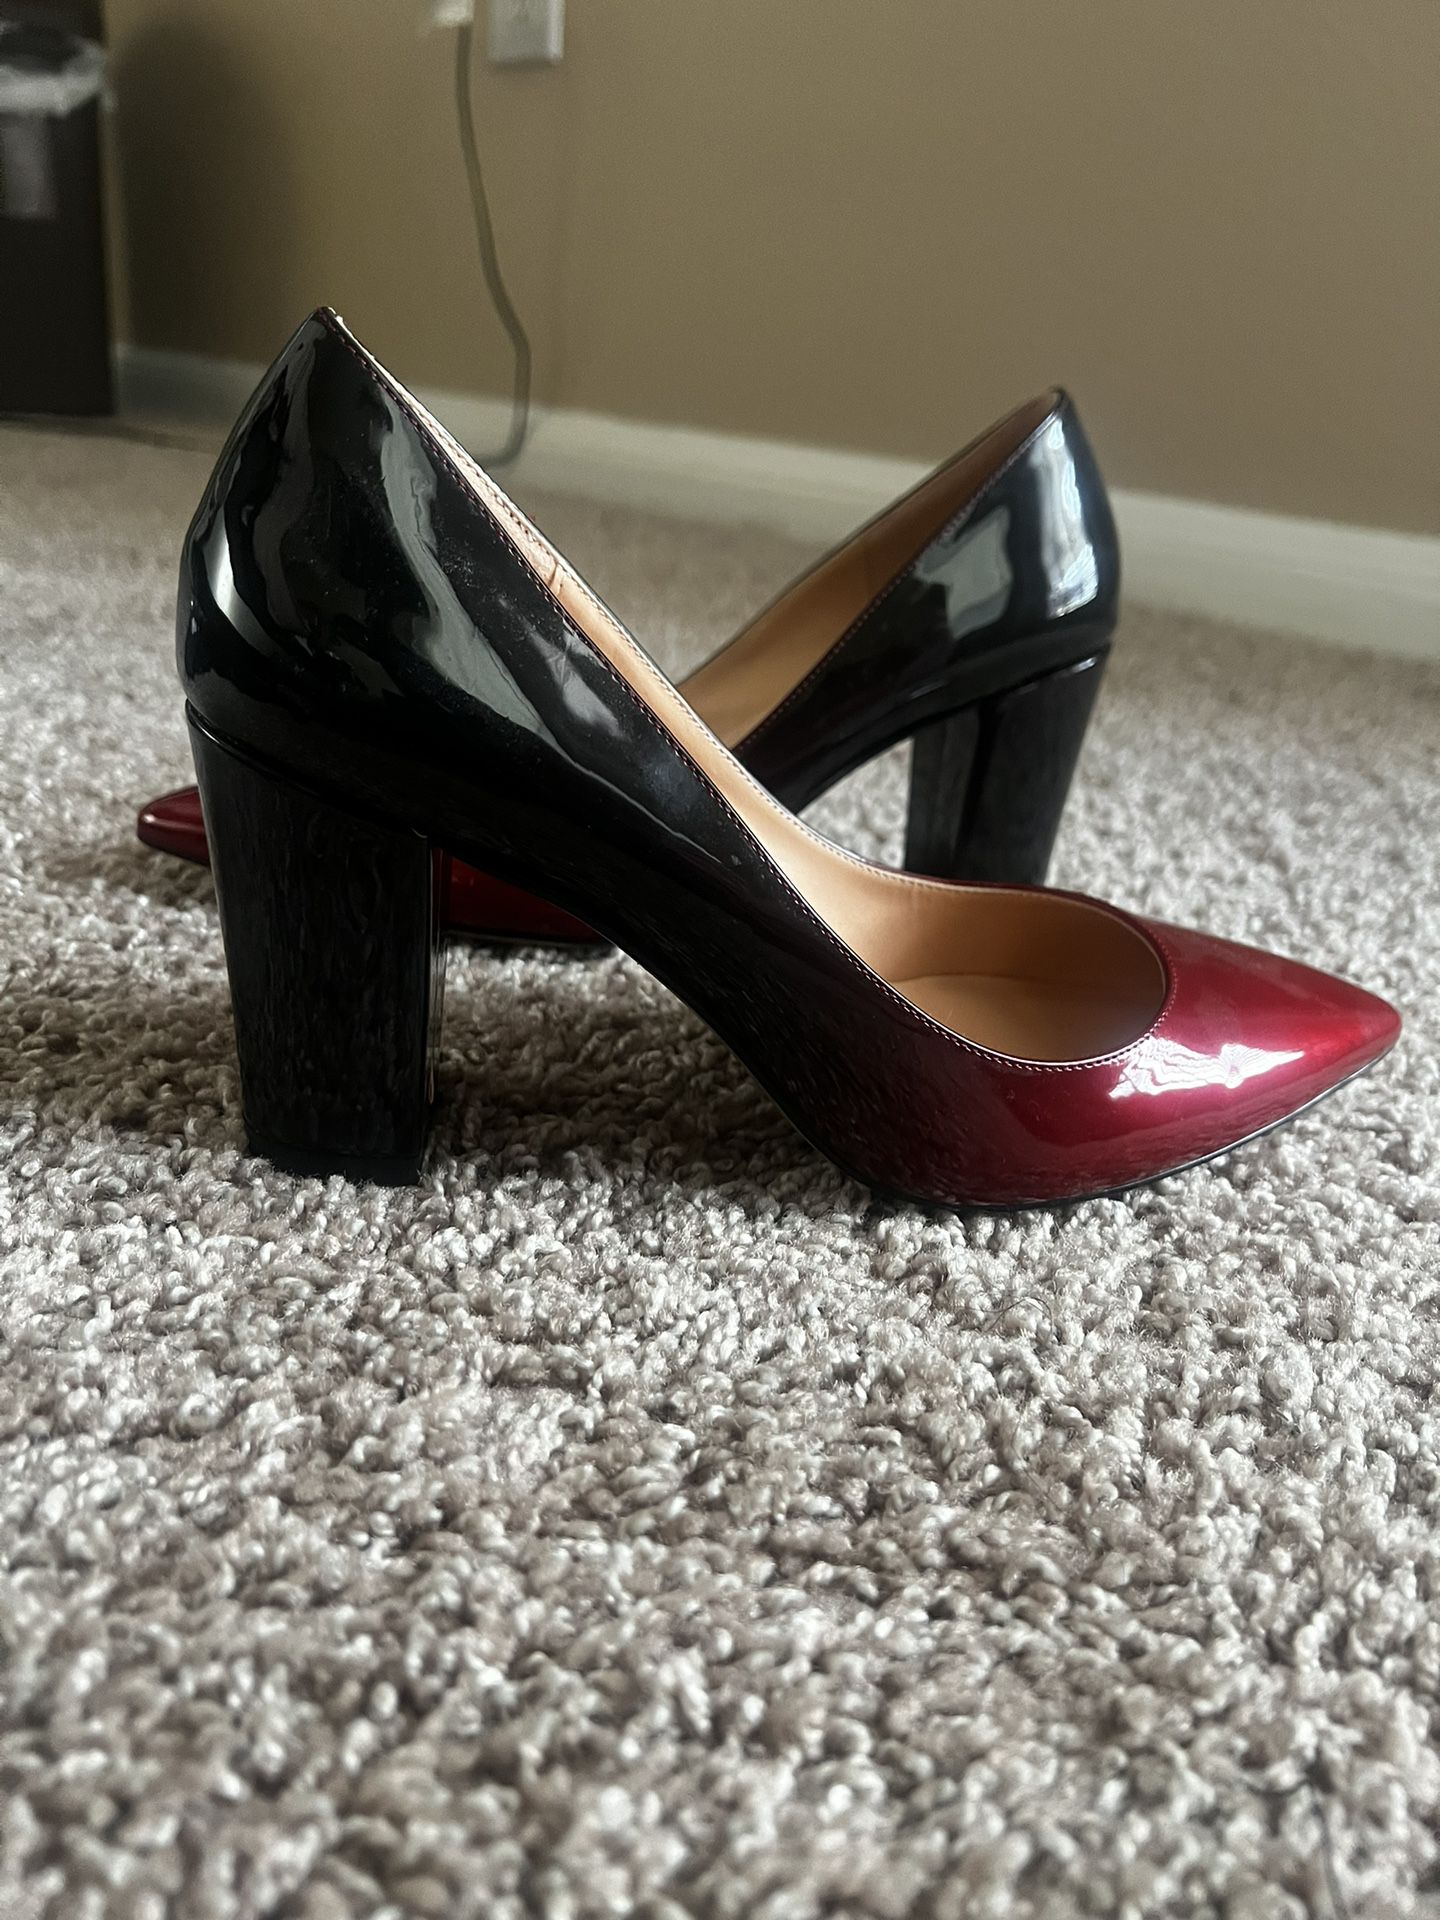 Size 8 Classy Red And Black Ombré Pumps - Like New